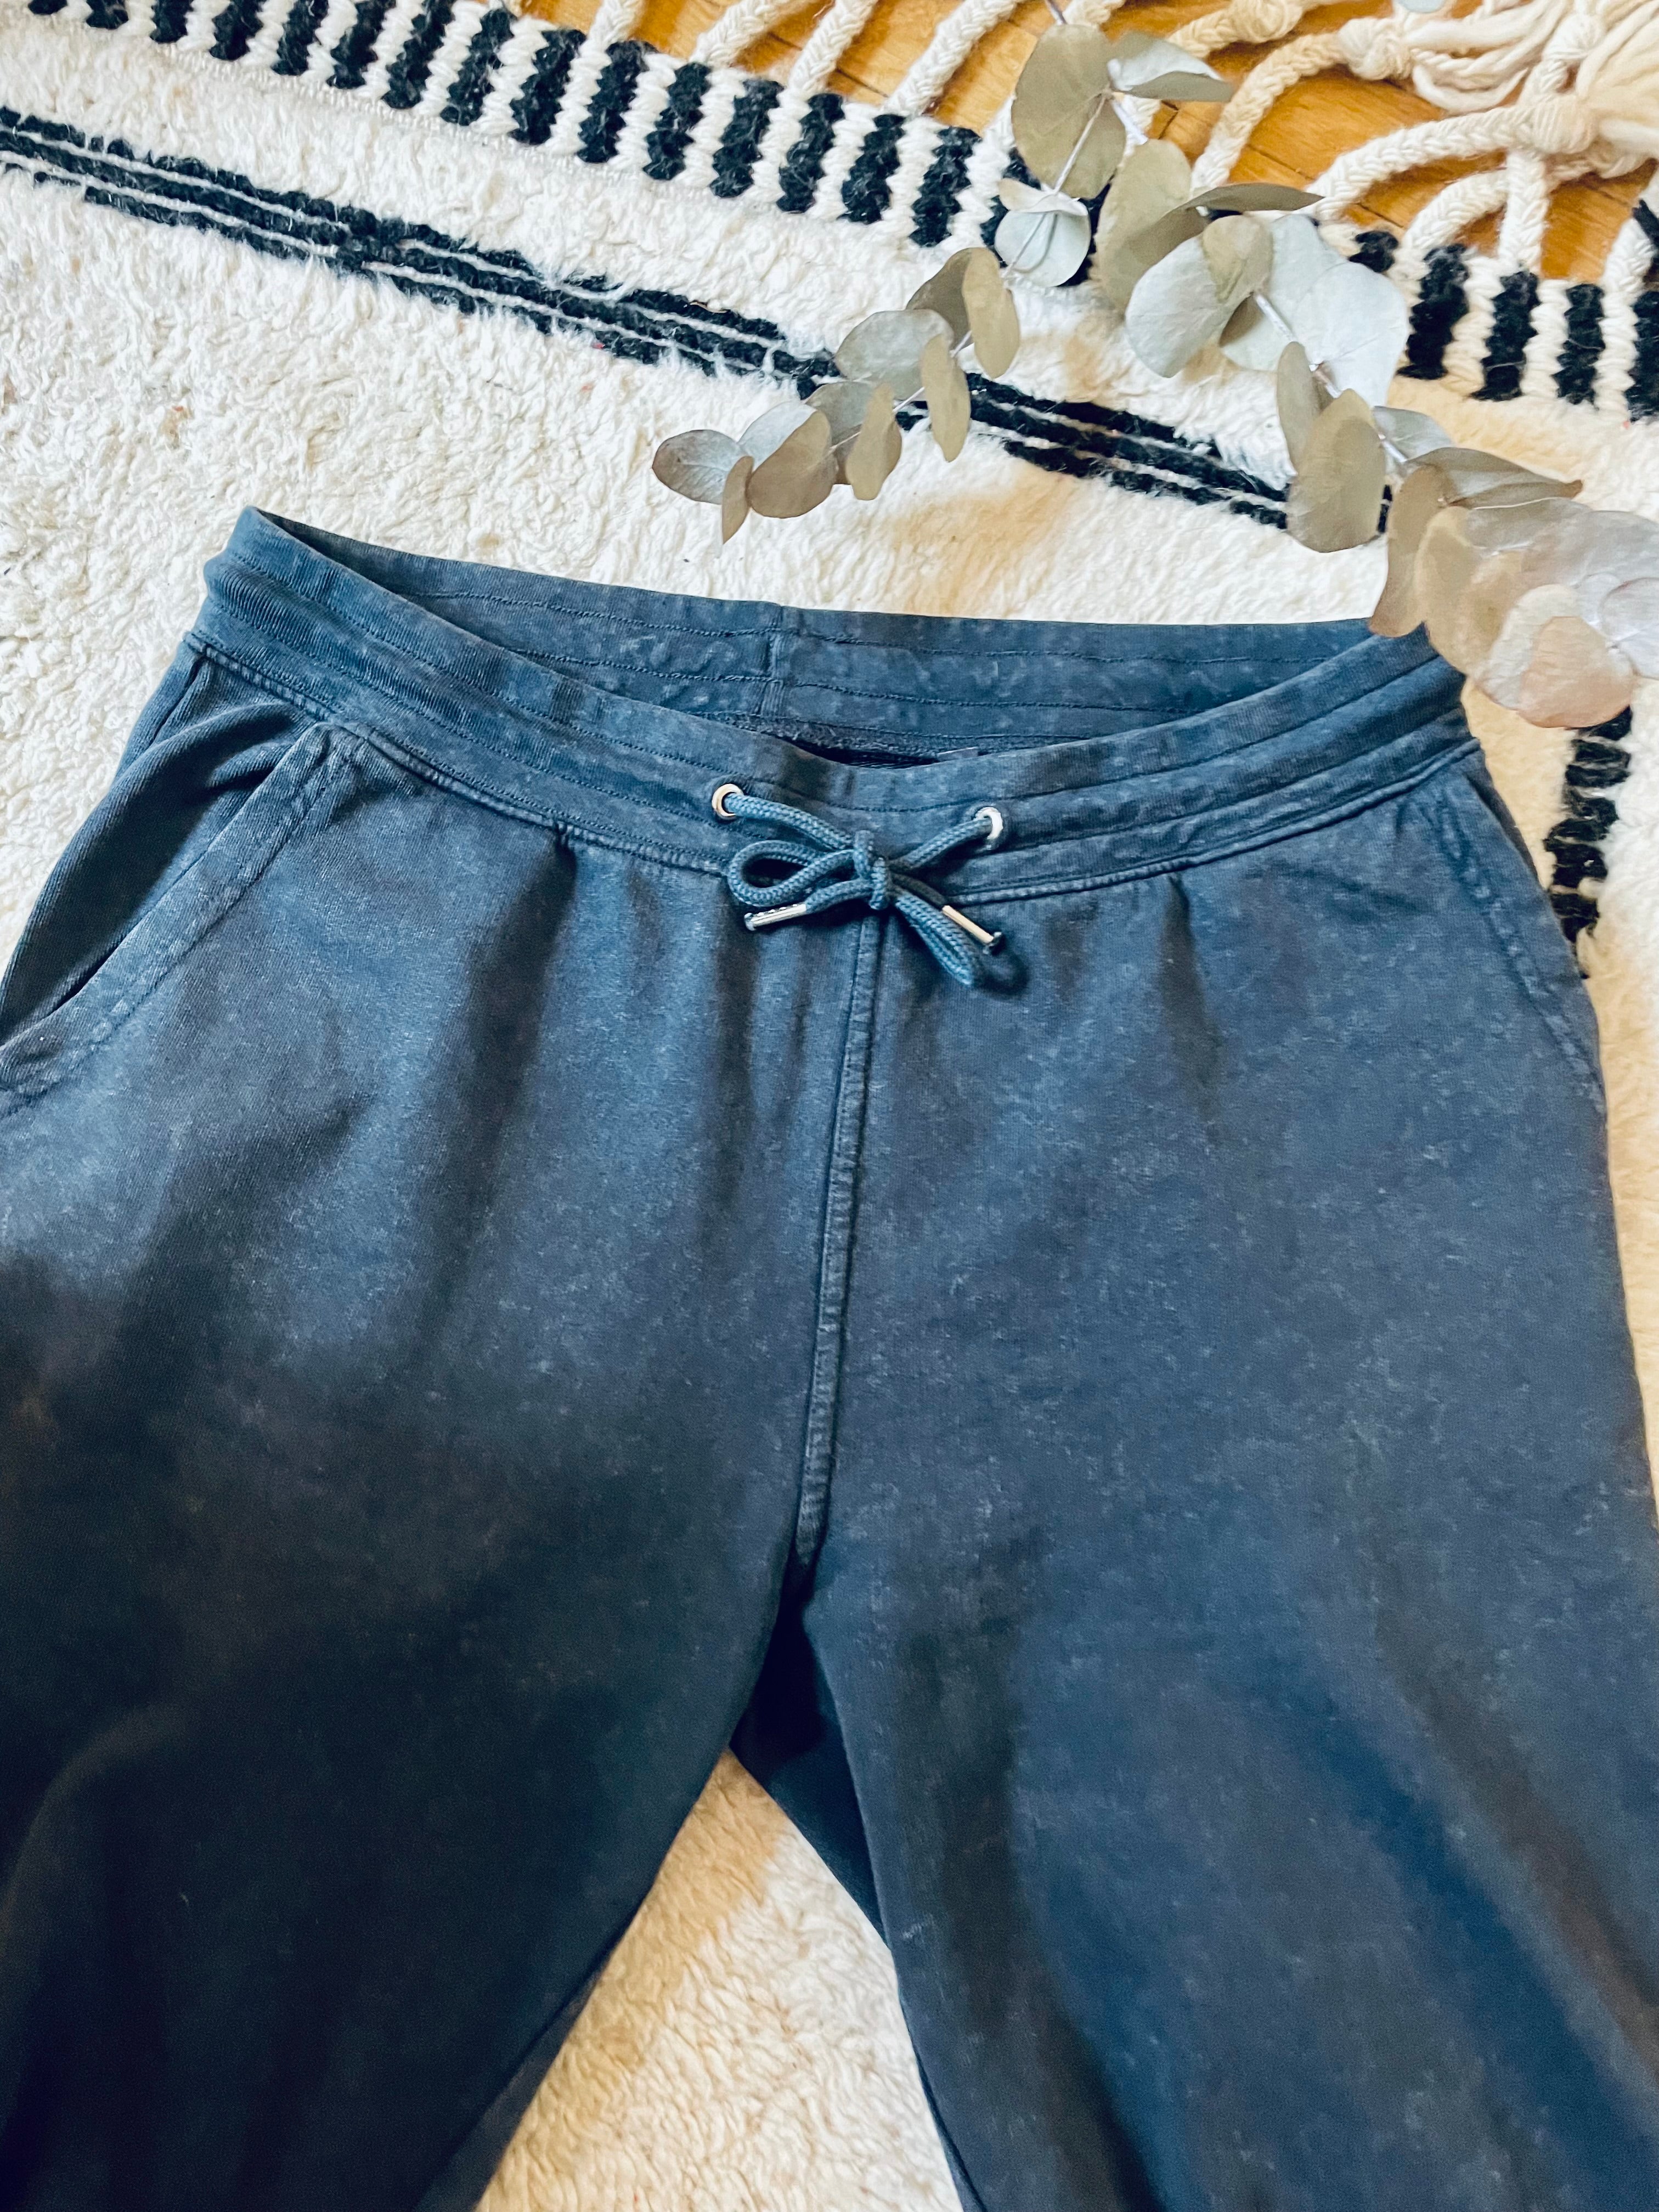 MIXED VINTAGE ANTHRACITE JOGGER